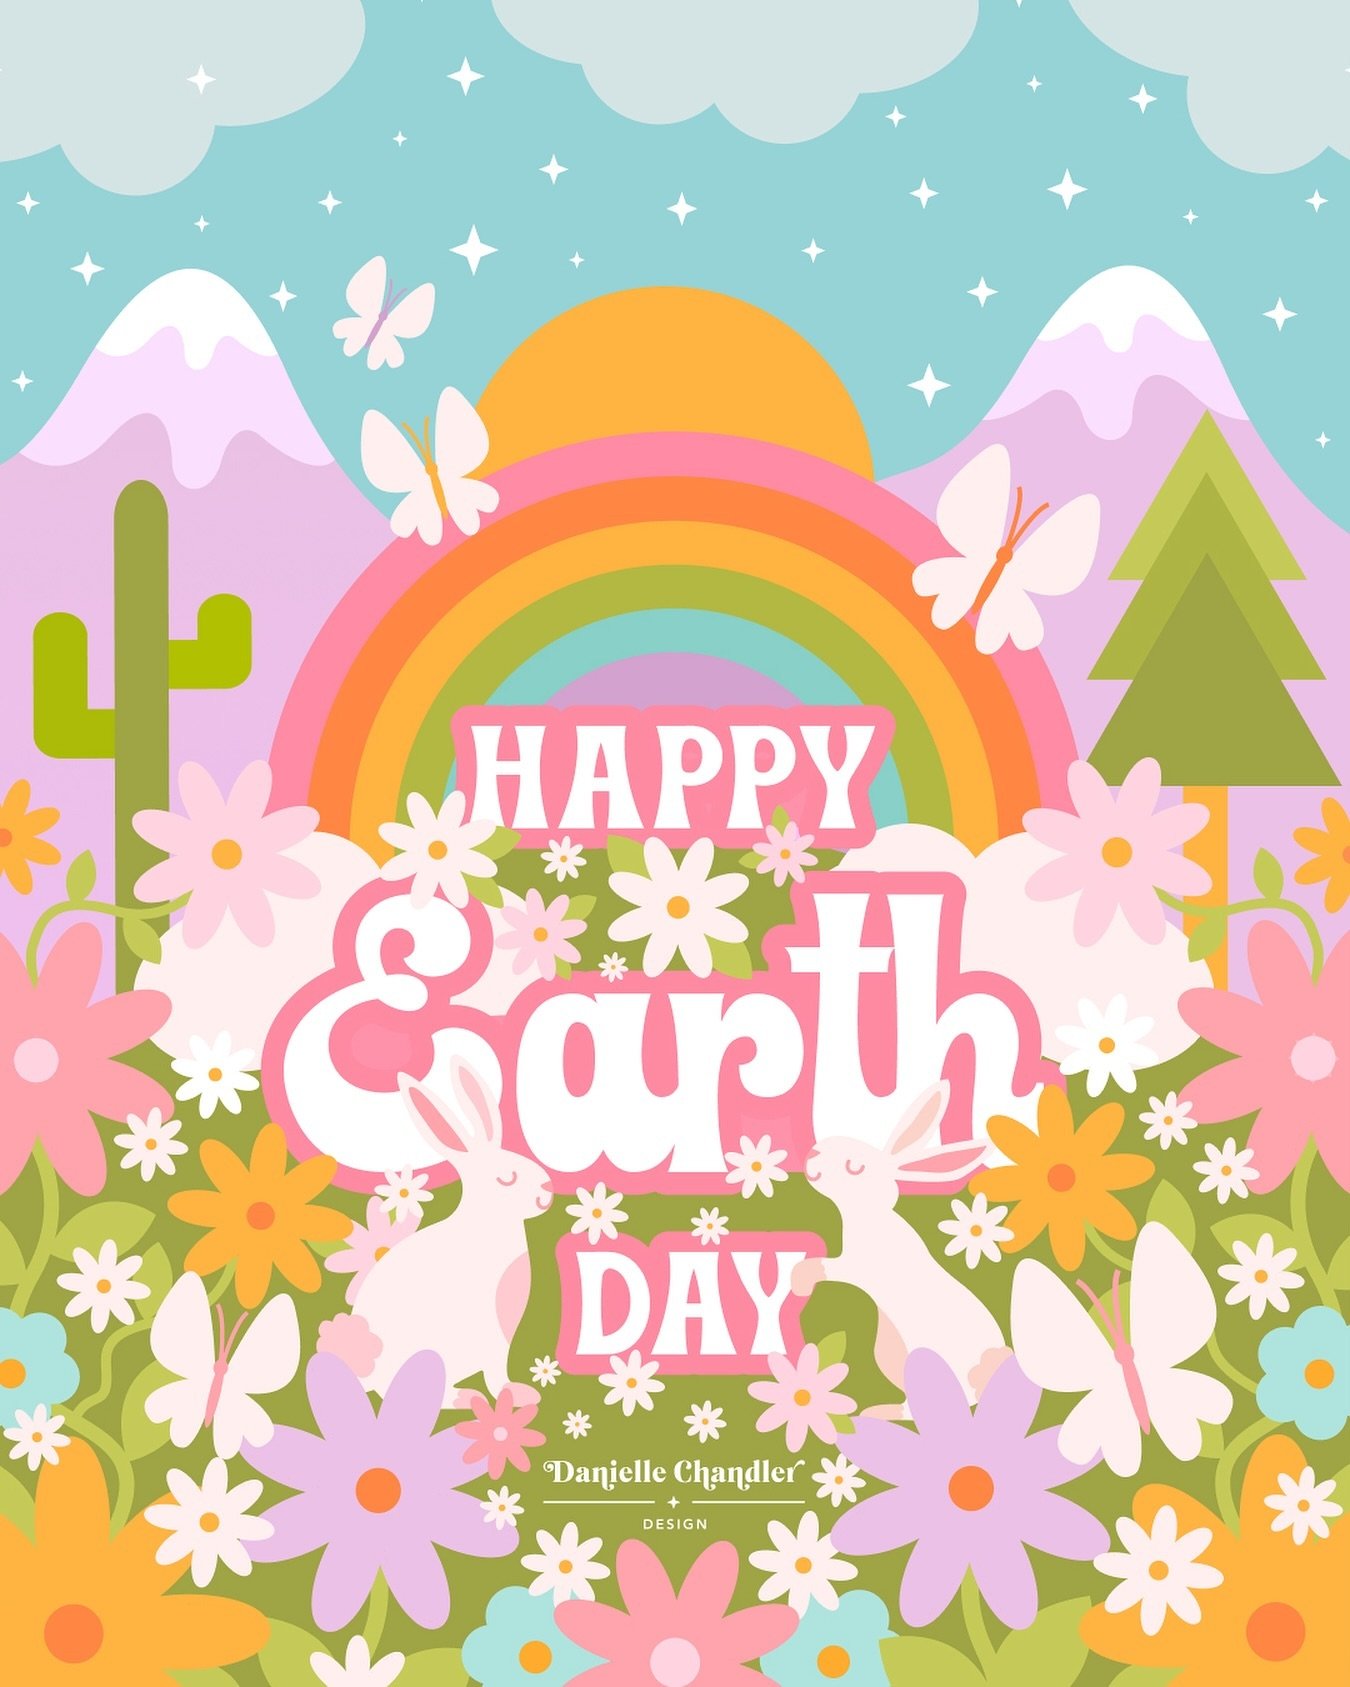 Happy Earth Day! 🌷☀️🌲🦋